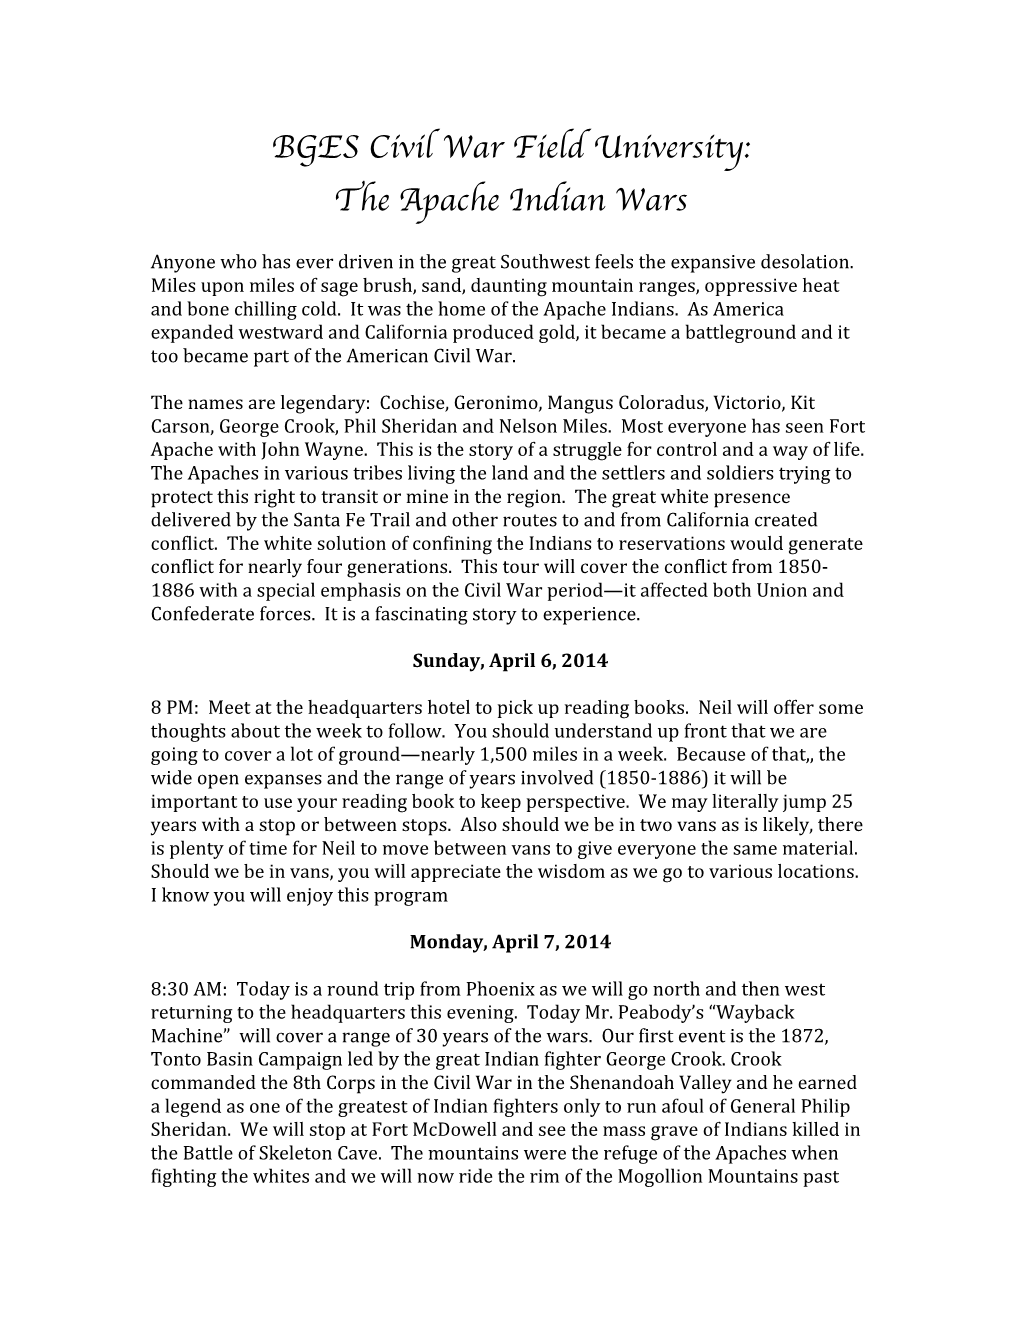 The Apache Indian Wars